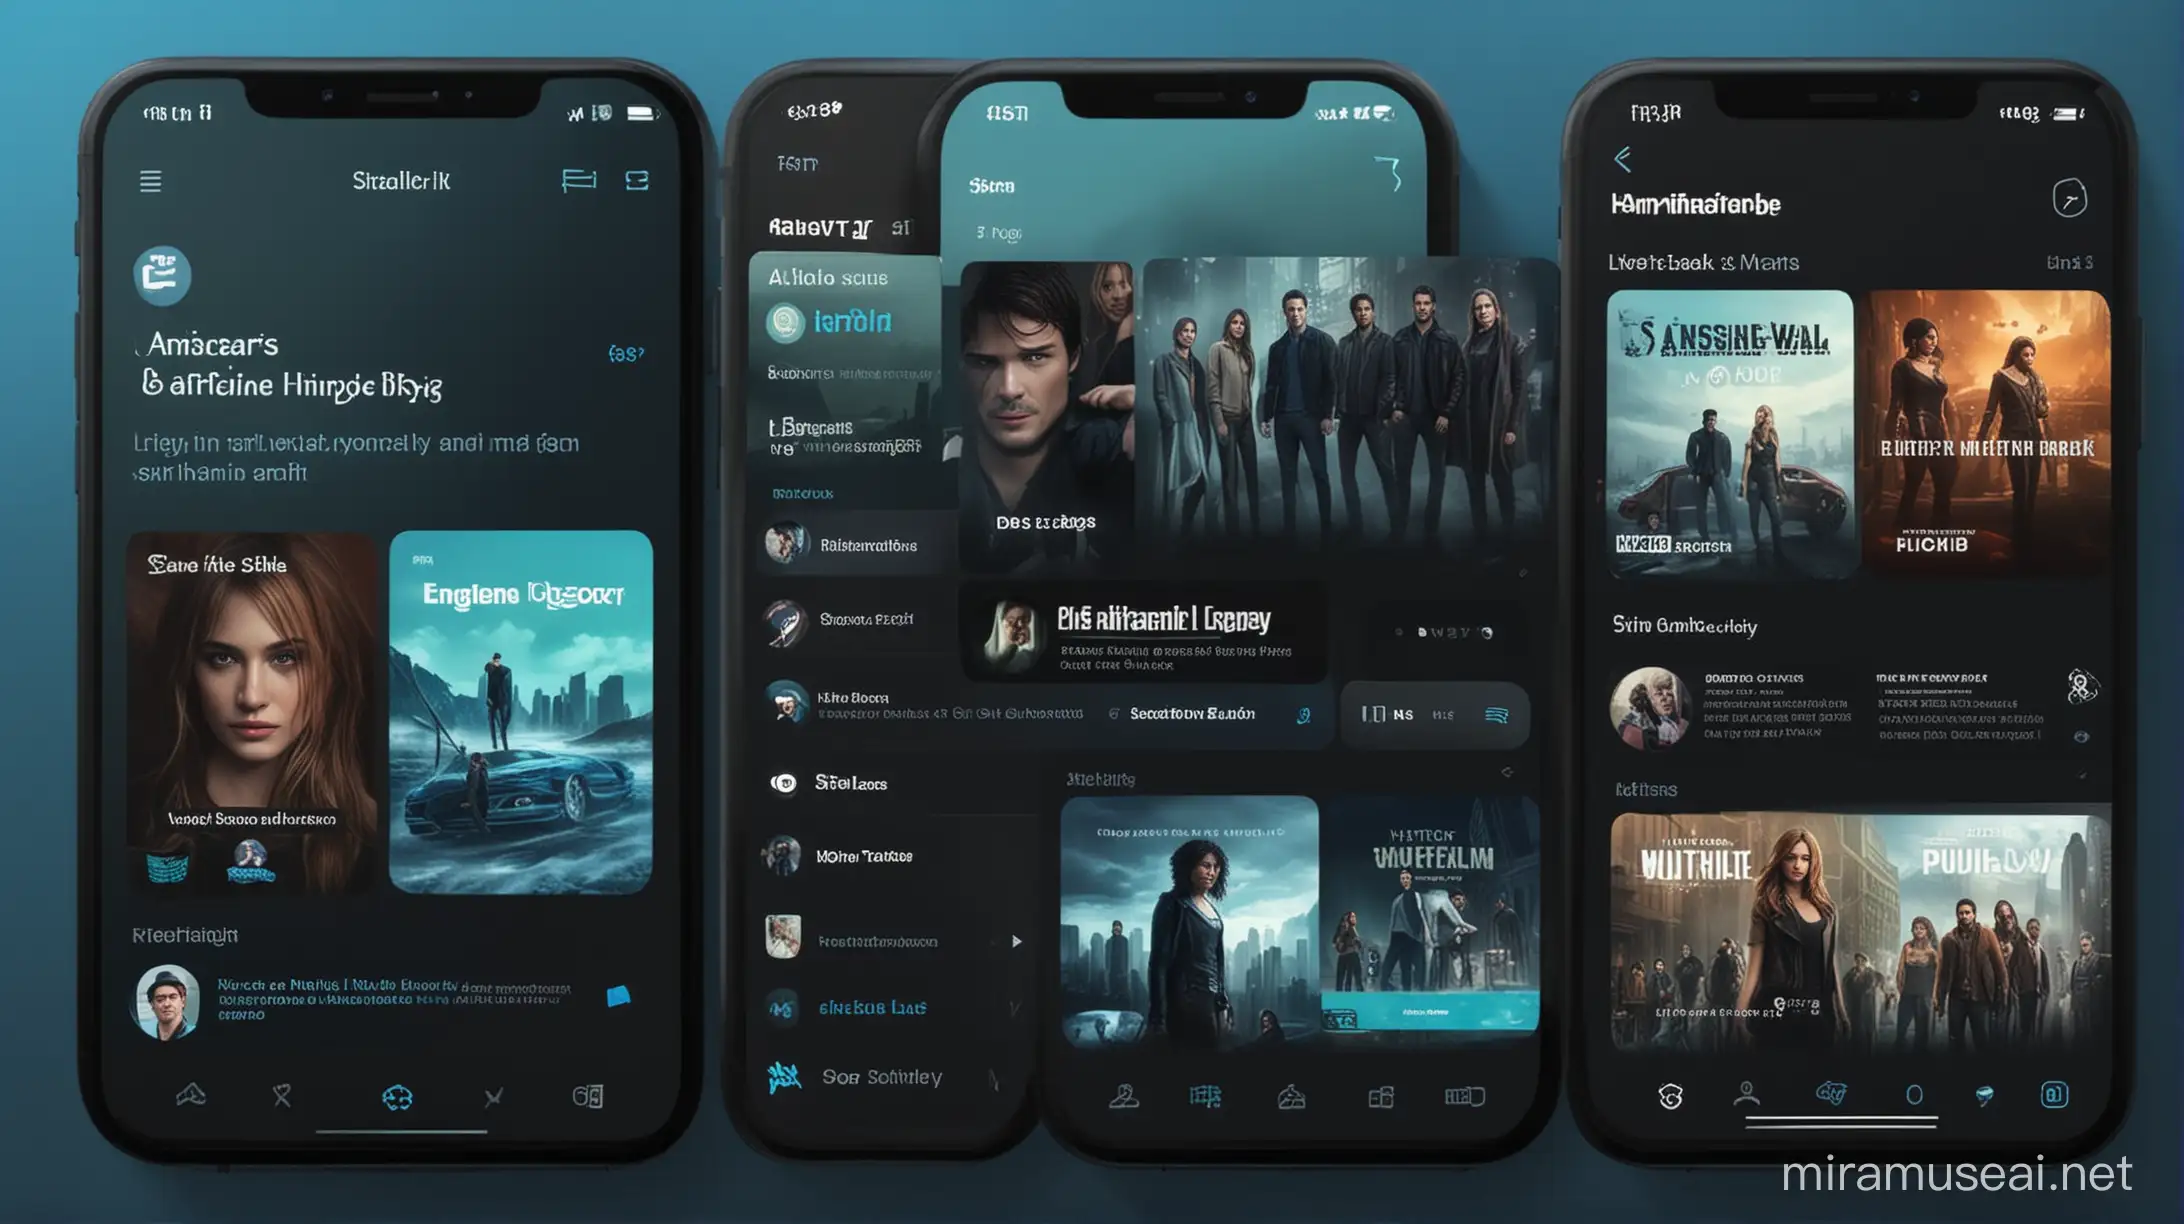 create a video streaming app in the style of netflix and hulu. the colors are blue and black